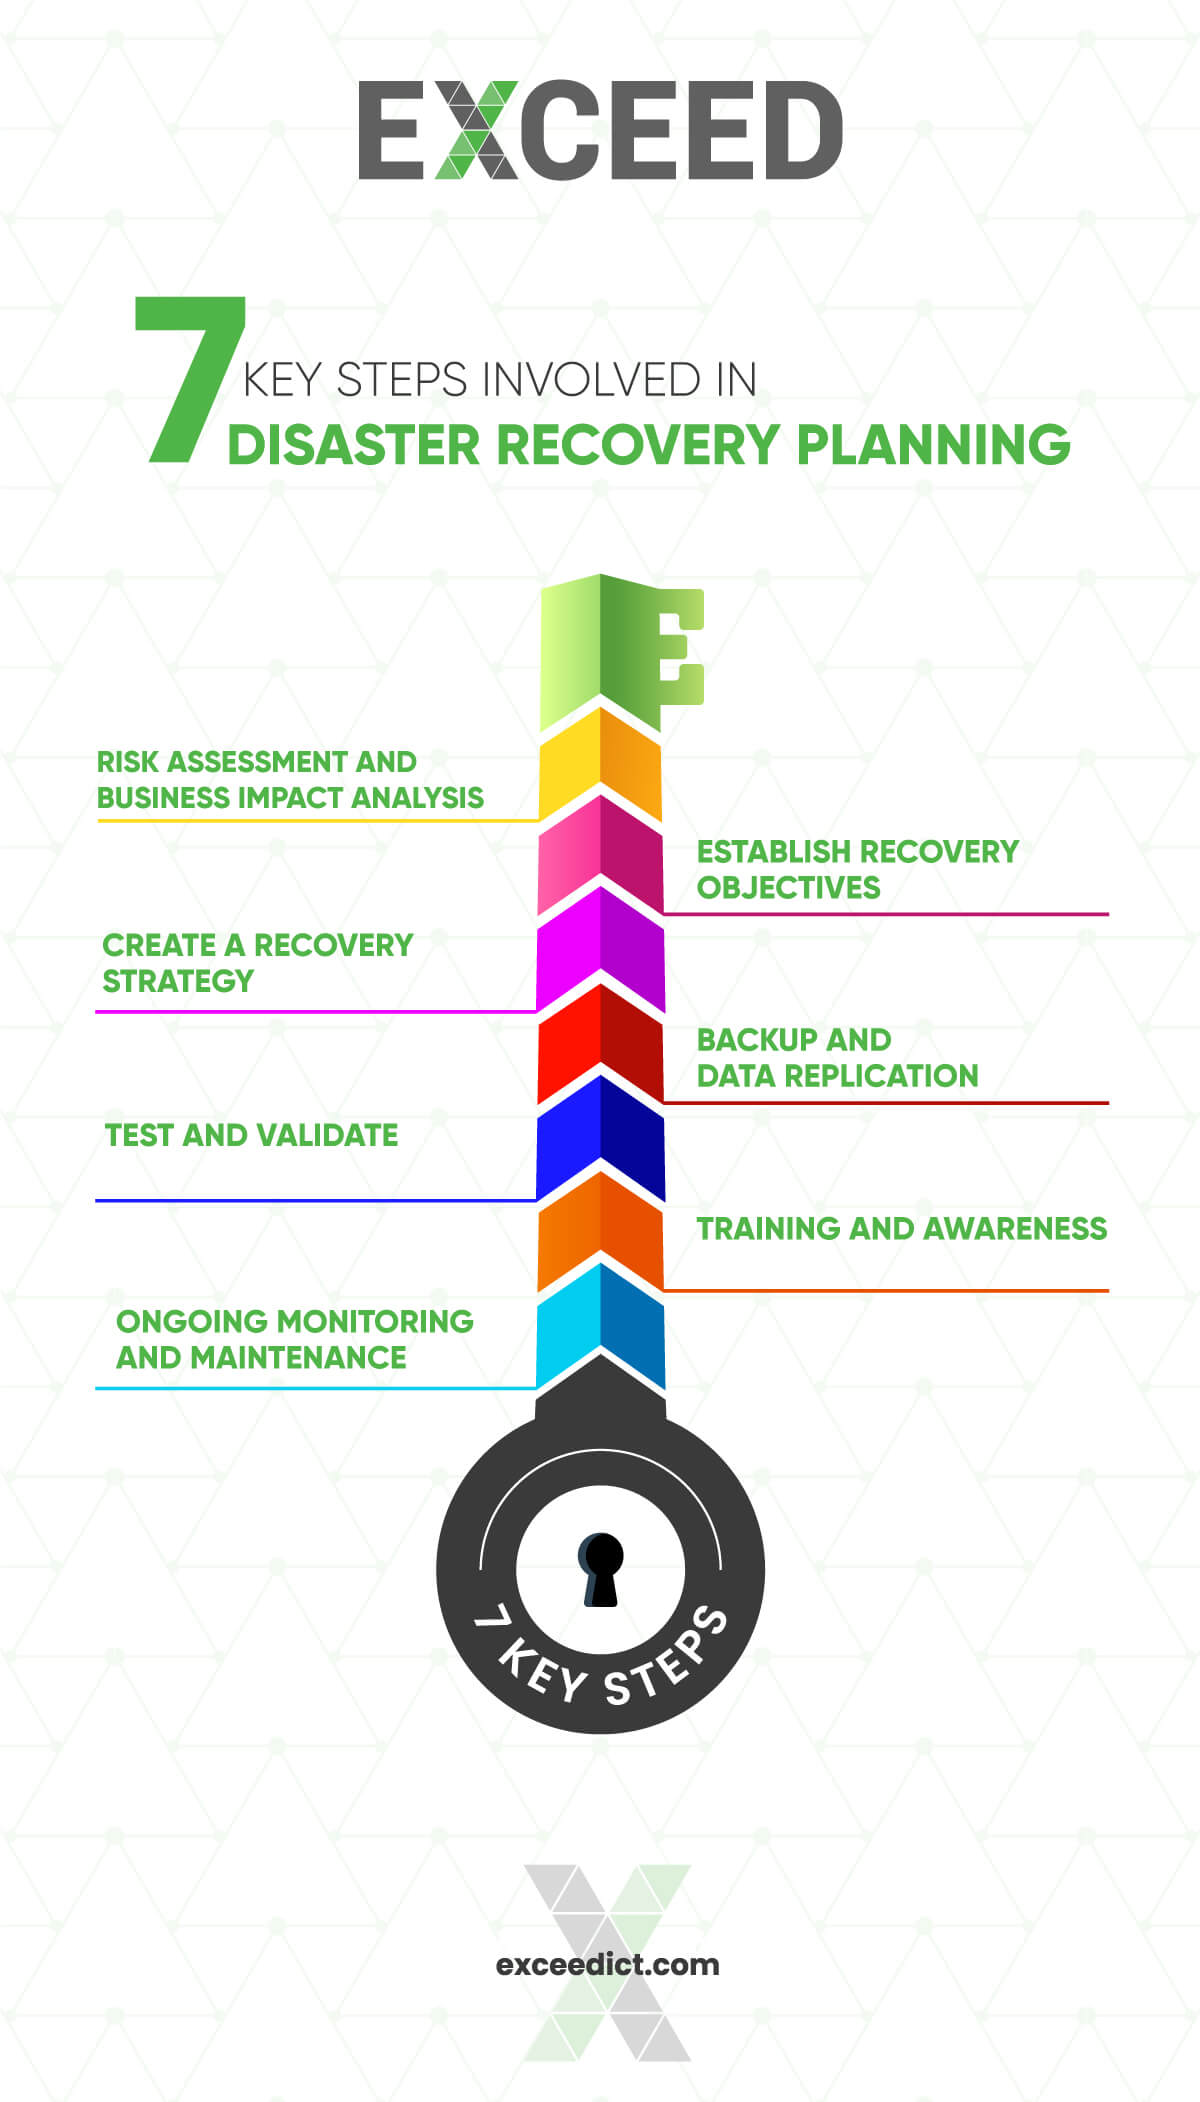 7 key steps involved in disaster recovery planning